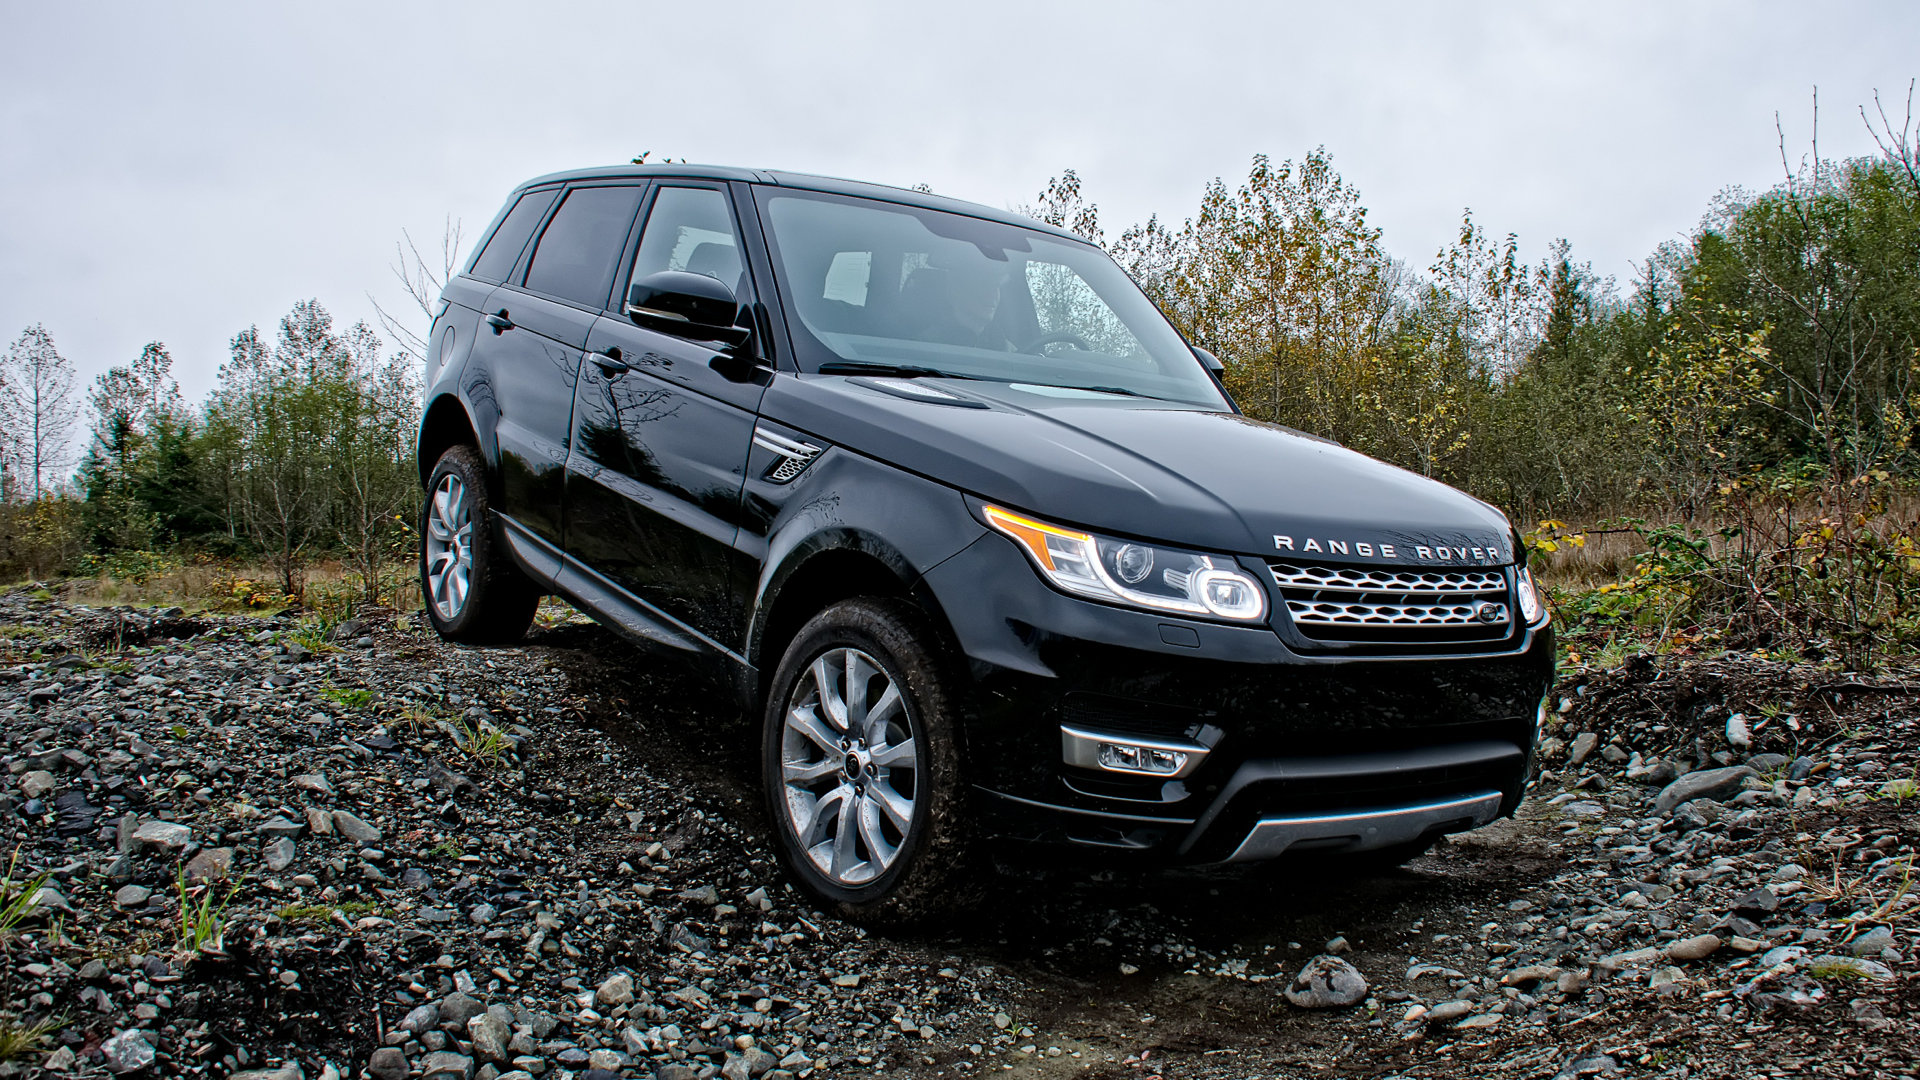 Review: 2014 Range Rover Sport HSE - The New York Times